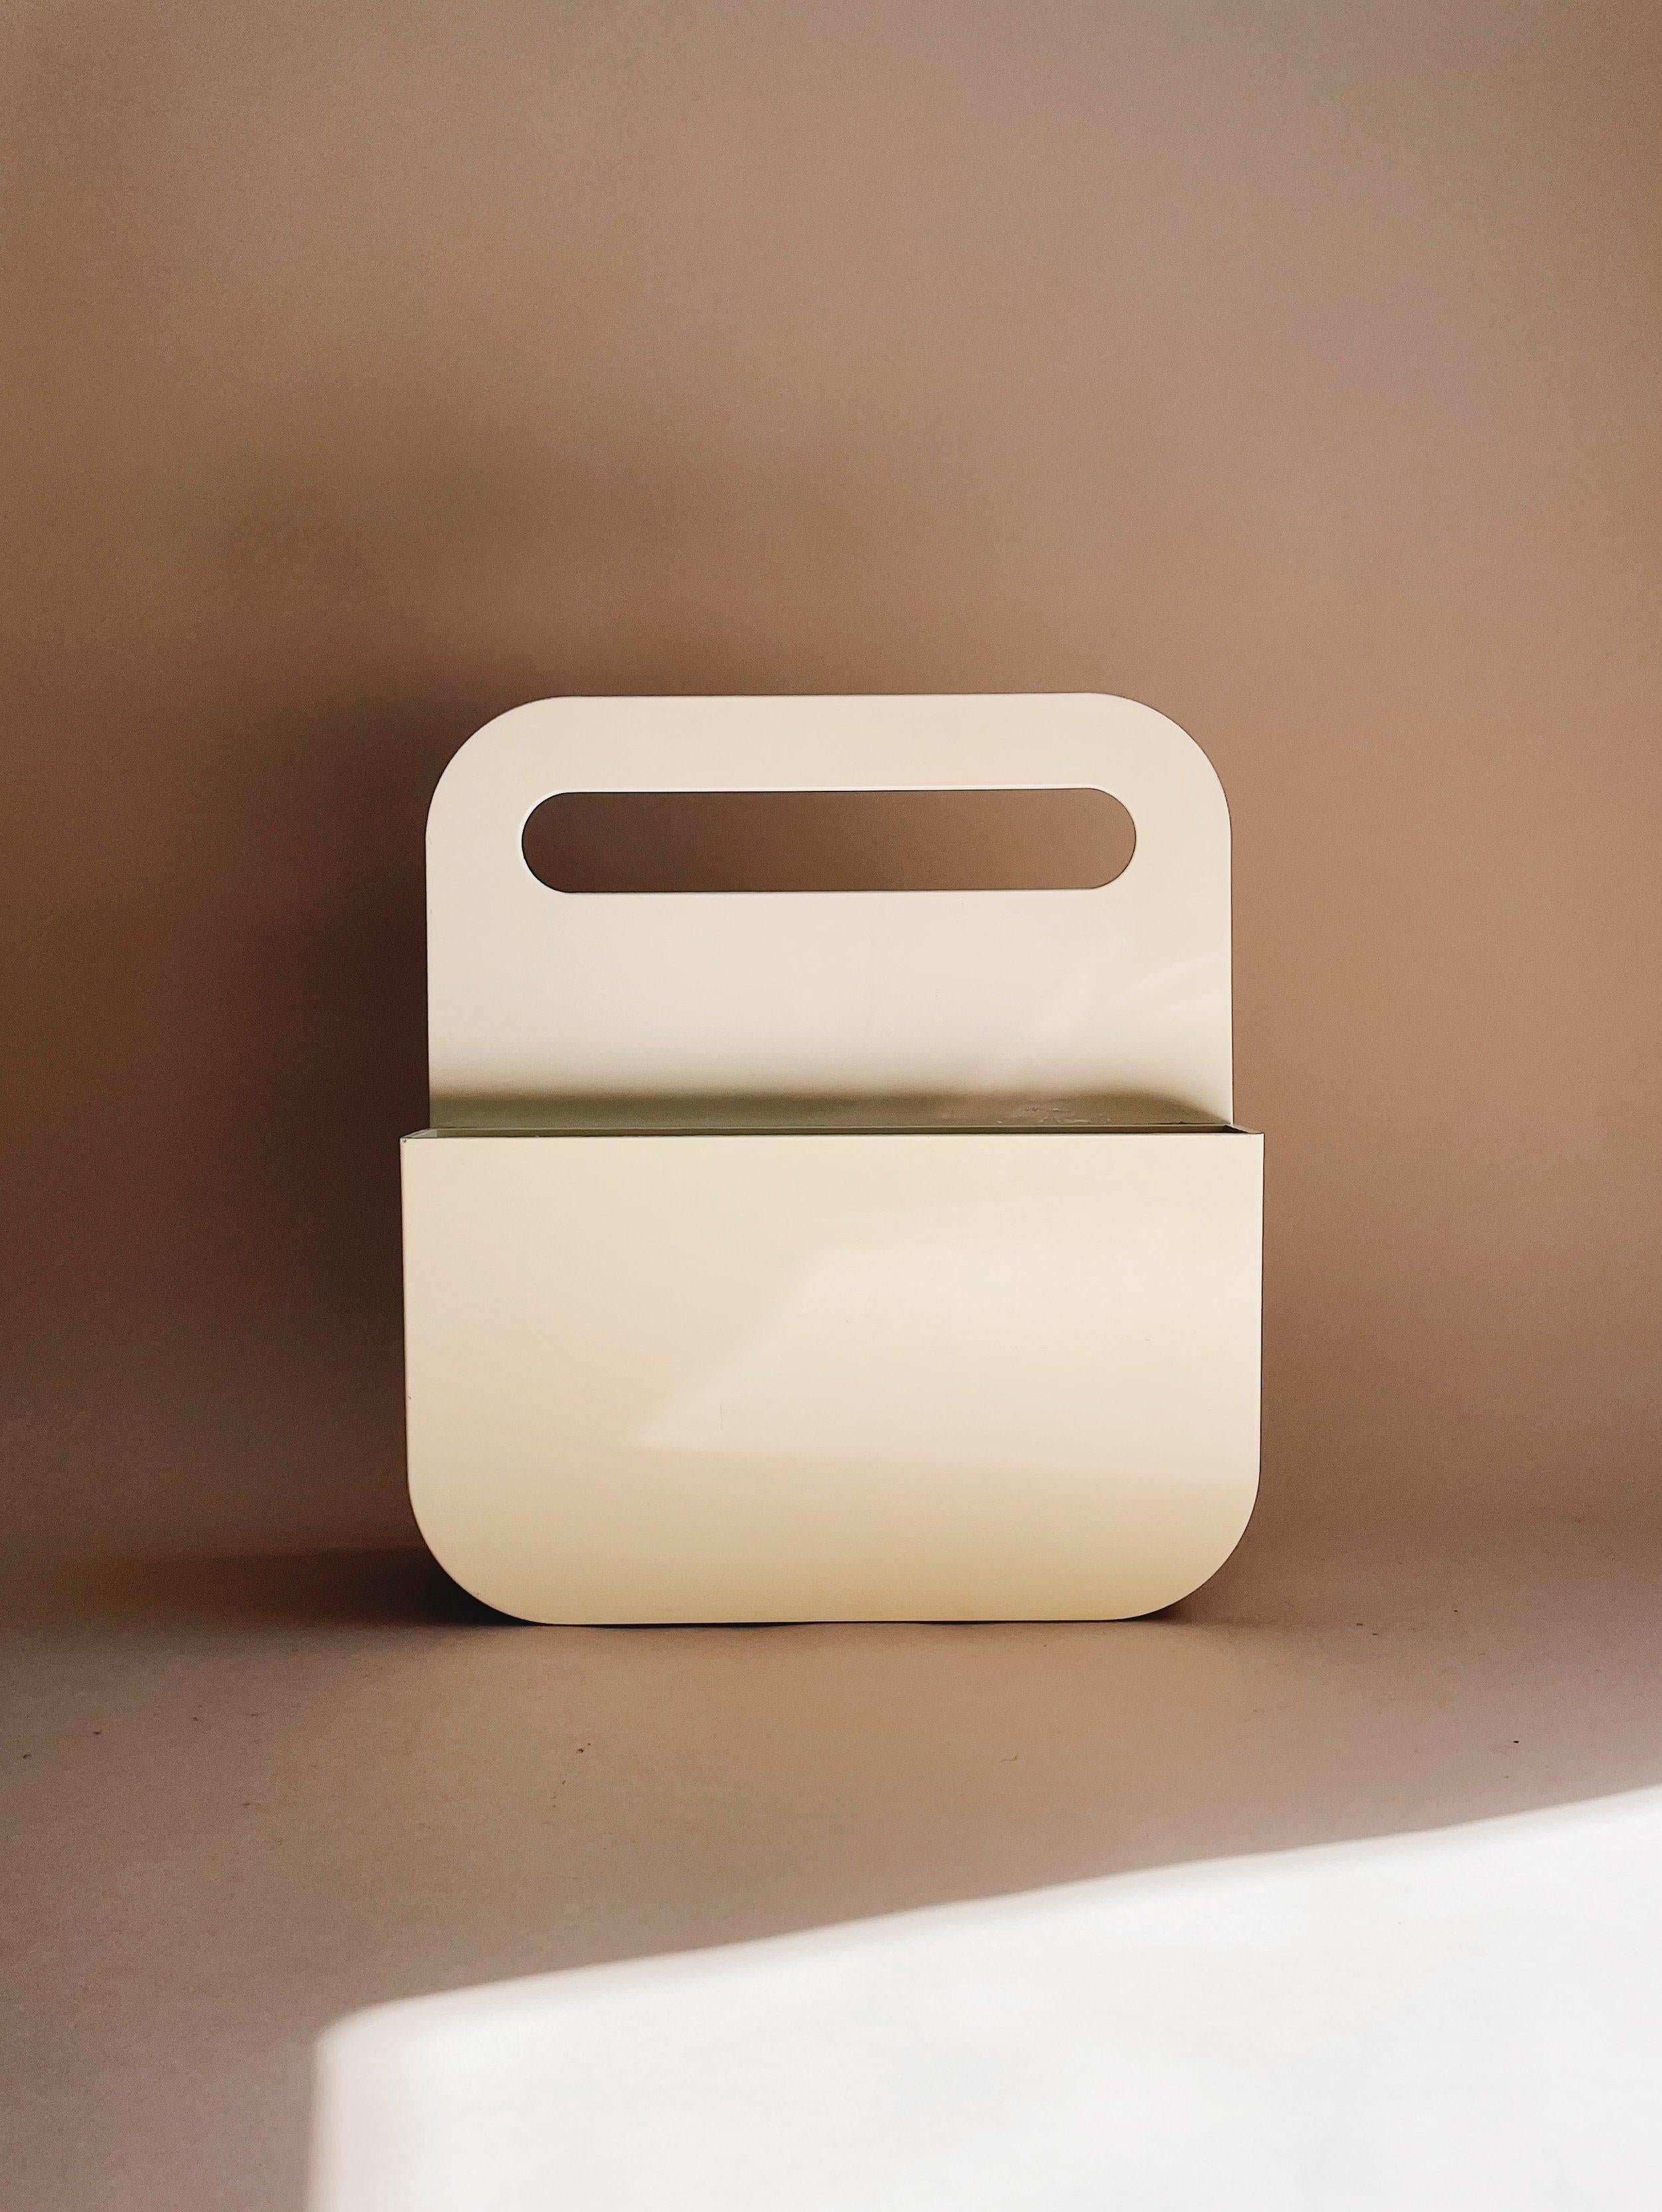 Olaf Von Bohr

Ivory plastic magazine rack, designed by Olaf Von Bohr for Kartell.

Measures 12” tall, 10.75” wide and 3.5” deep.